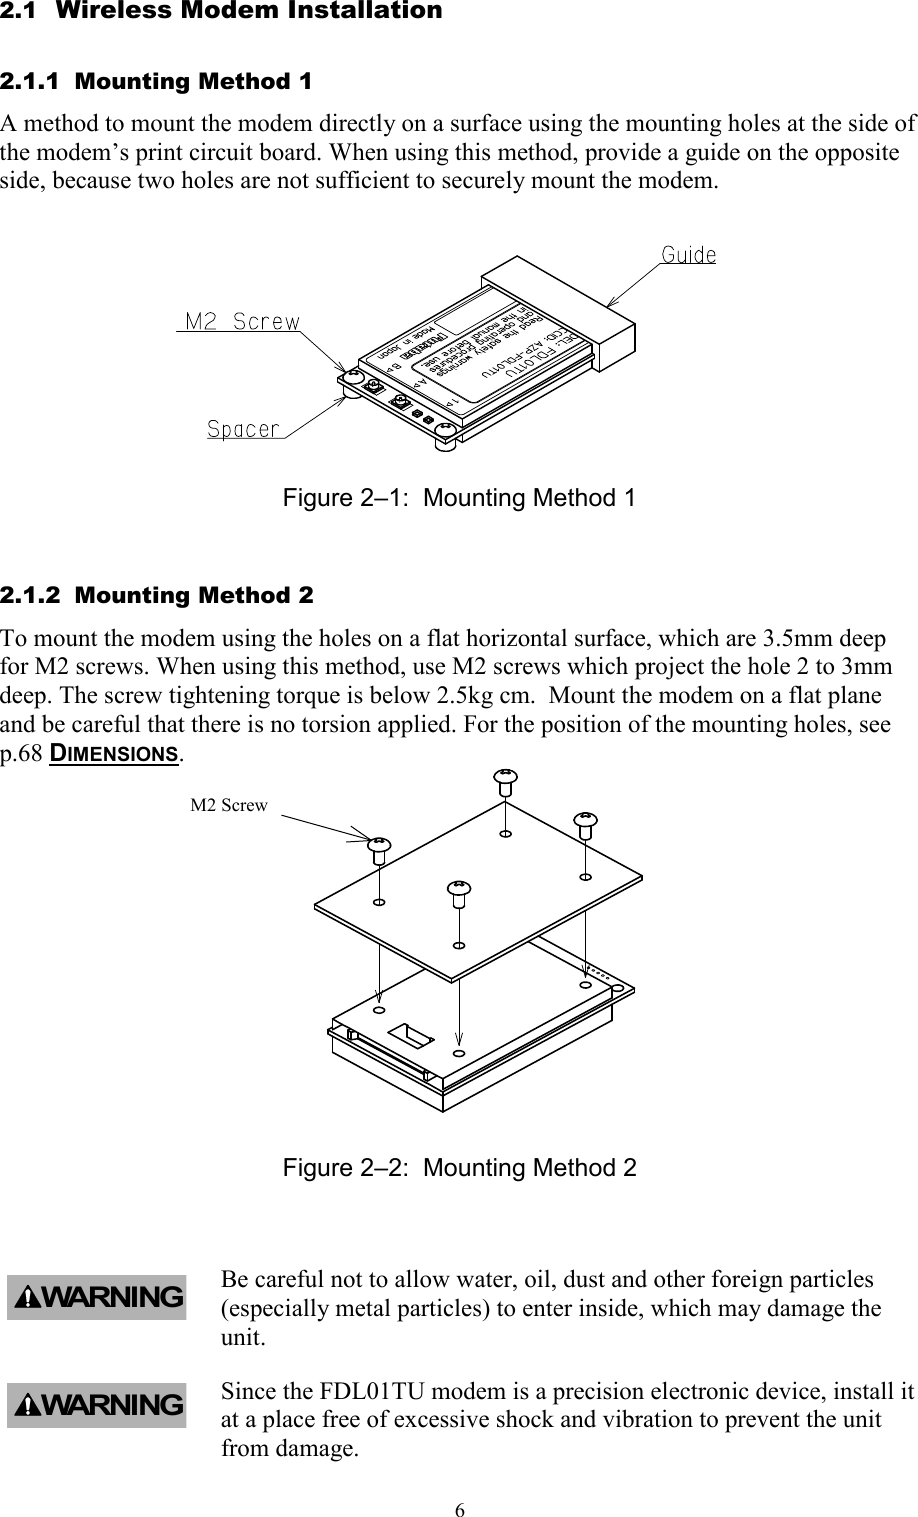   62.1  Wireless Modem Installation 2.1.1  Mounting Method 1 A method to mount the modem directly on a surface using the mounting holes at the side of the modem’s print circuit board. When using this method, provide a guide on the opposite side, because two holes are not sufficient to securely mount the modem.            Figure 2–1:  Mounting Method 1 2.1.2  Mounting Method 2 To mount the modem using the holes on a flat horizontal surface, which are 3.5mm deep for M2 screws. When using this method, use M2 screws which project the hole 2 to 3mm deep. The screw tightening torque is below 2.5kg cm.  Mount the modem on a flat plane and be careful that there is no torsion applied. For the position of the mounting holes, see  p.68 DIMENSIONS.  Figure 2–2:  Mounting Method 2  Be careful not to allow water, oil, dust and other foreign particles (especially metal particles) to enter inside, which may damage the unit. Since the FDL01TU modem is a precision electronic device, install it at a place free of excessive shock and vibration to prevent the unit from damage. WARNINGM2 Screw  WARNING